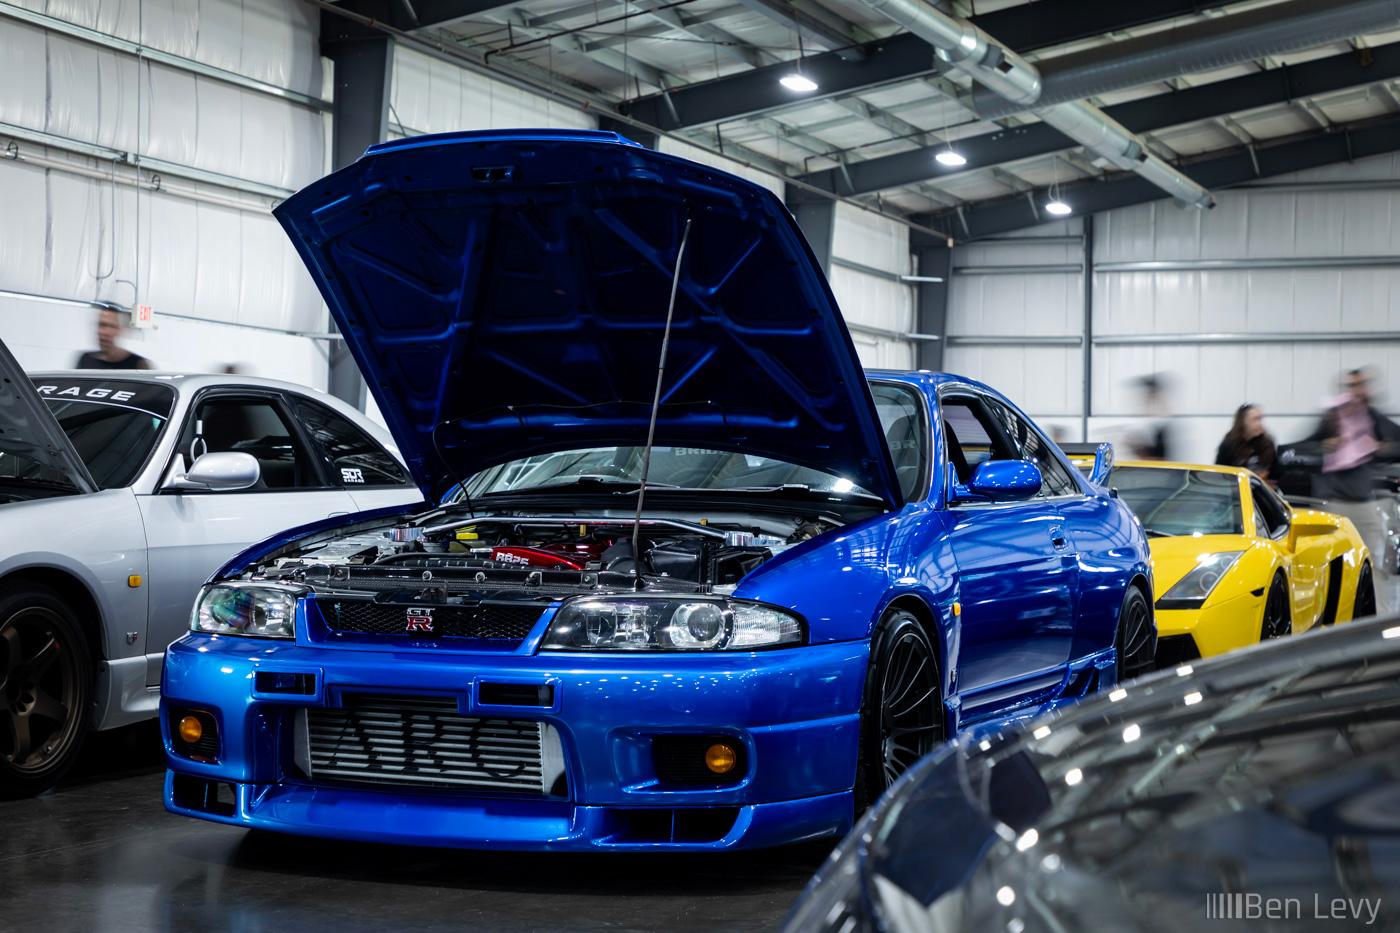 Blue R33 Nissan Skyline GT-R at Cars and Culture Show